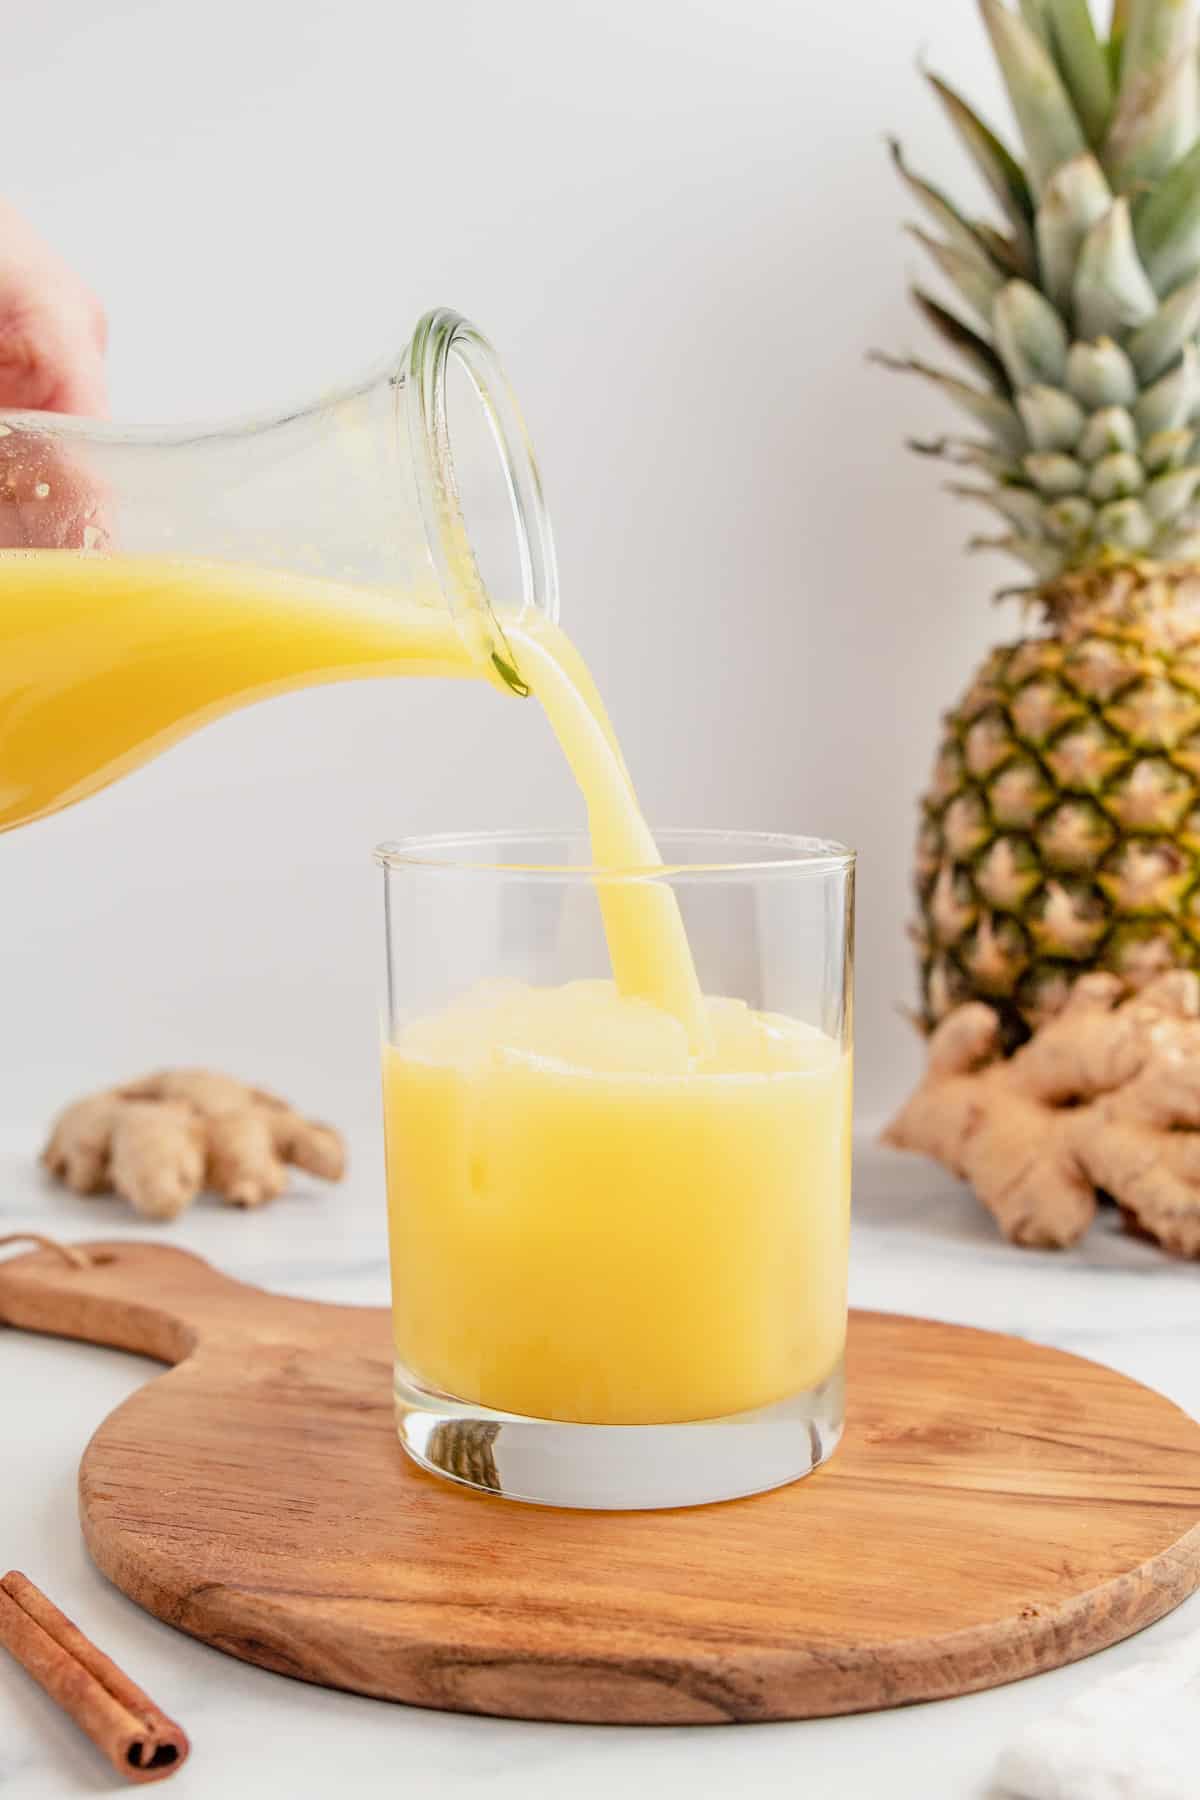 Pouring ginger pineapple juice into a glass.